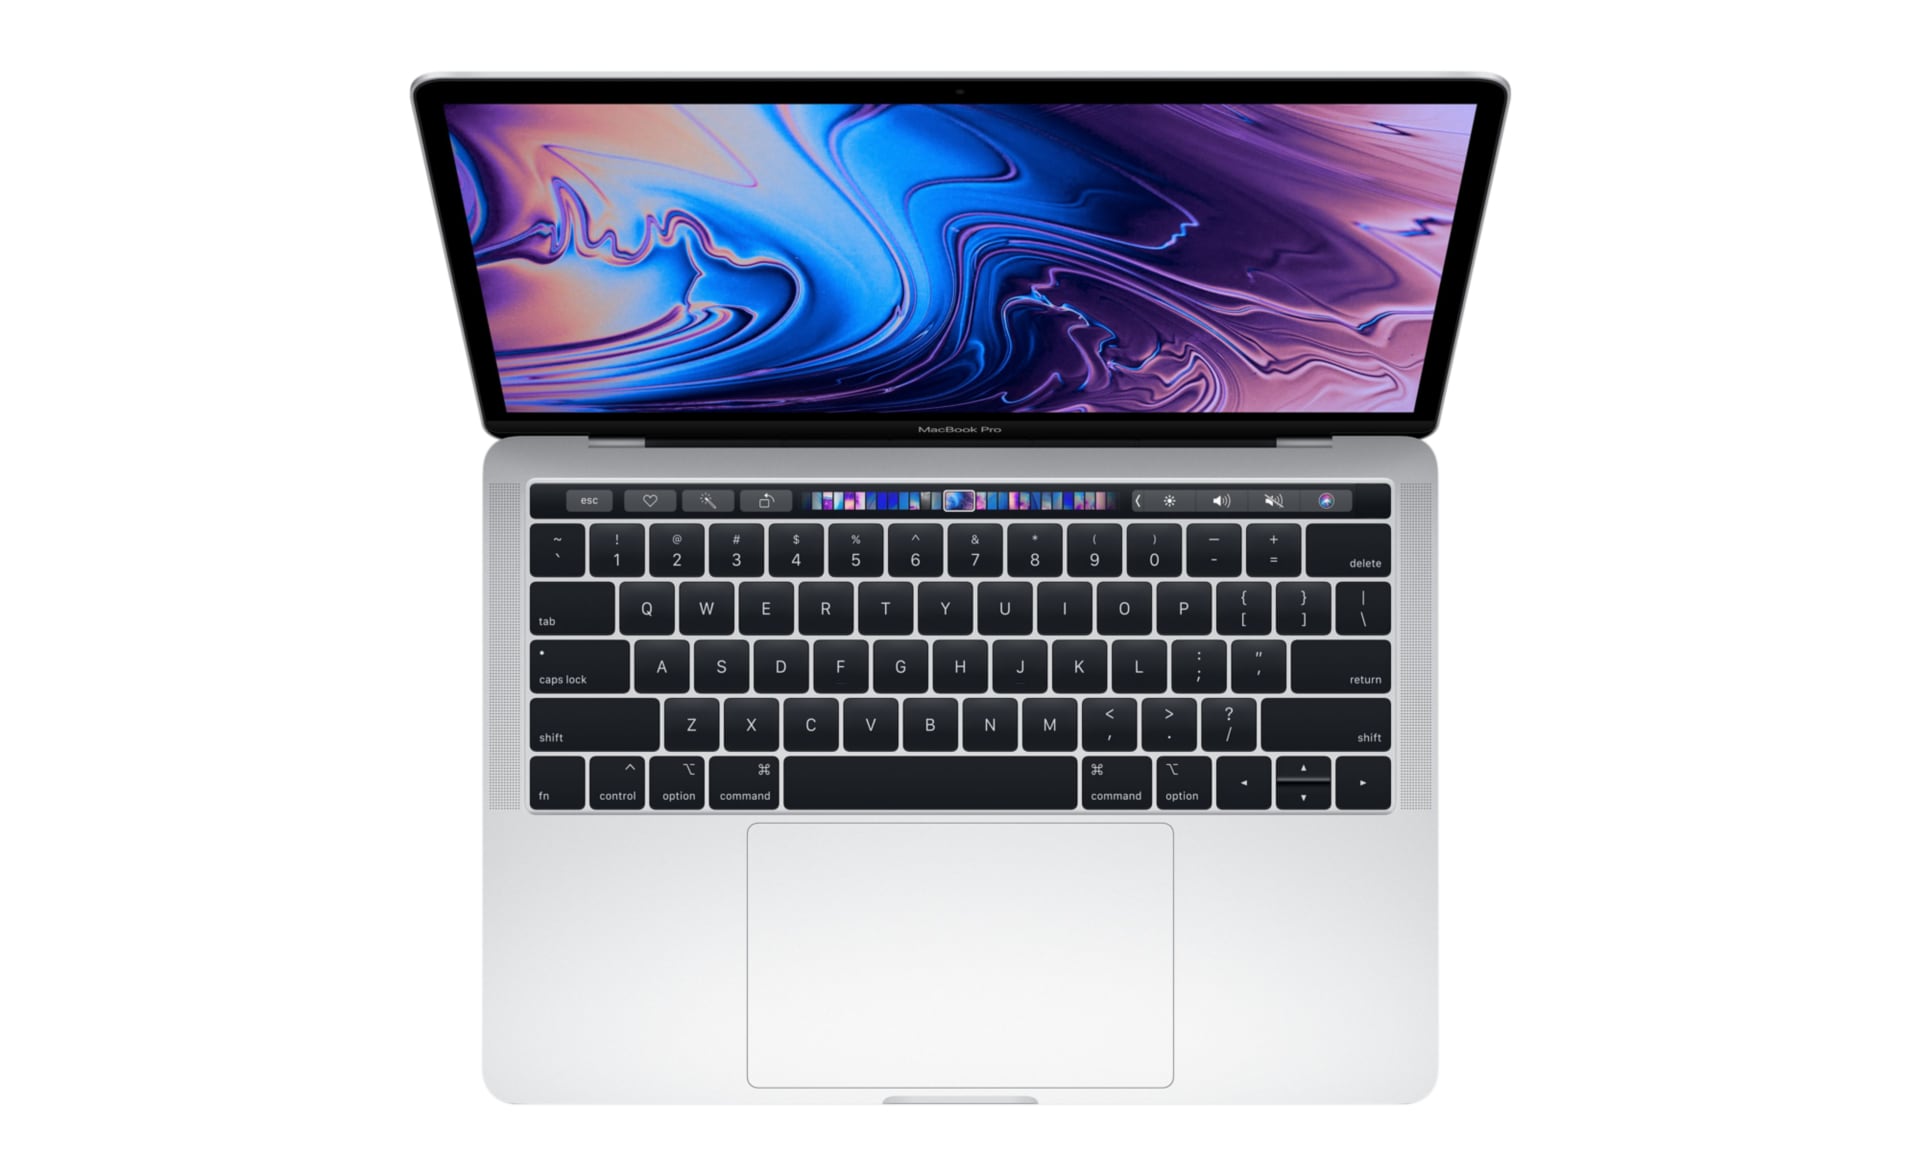 Apple MacBook Pro 13" Core i7 1.7GHz 8GB 256GB - Touch Bar - Silver